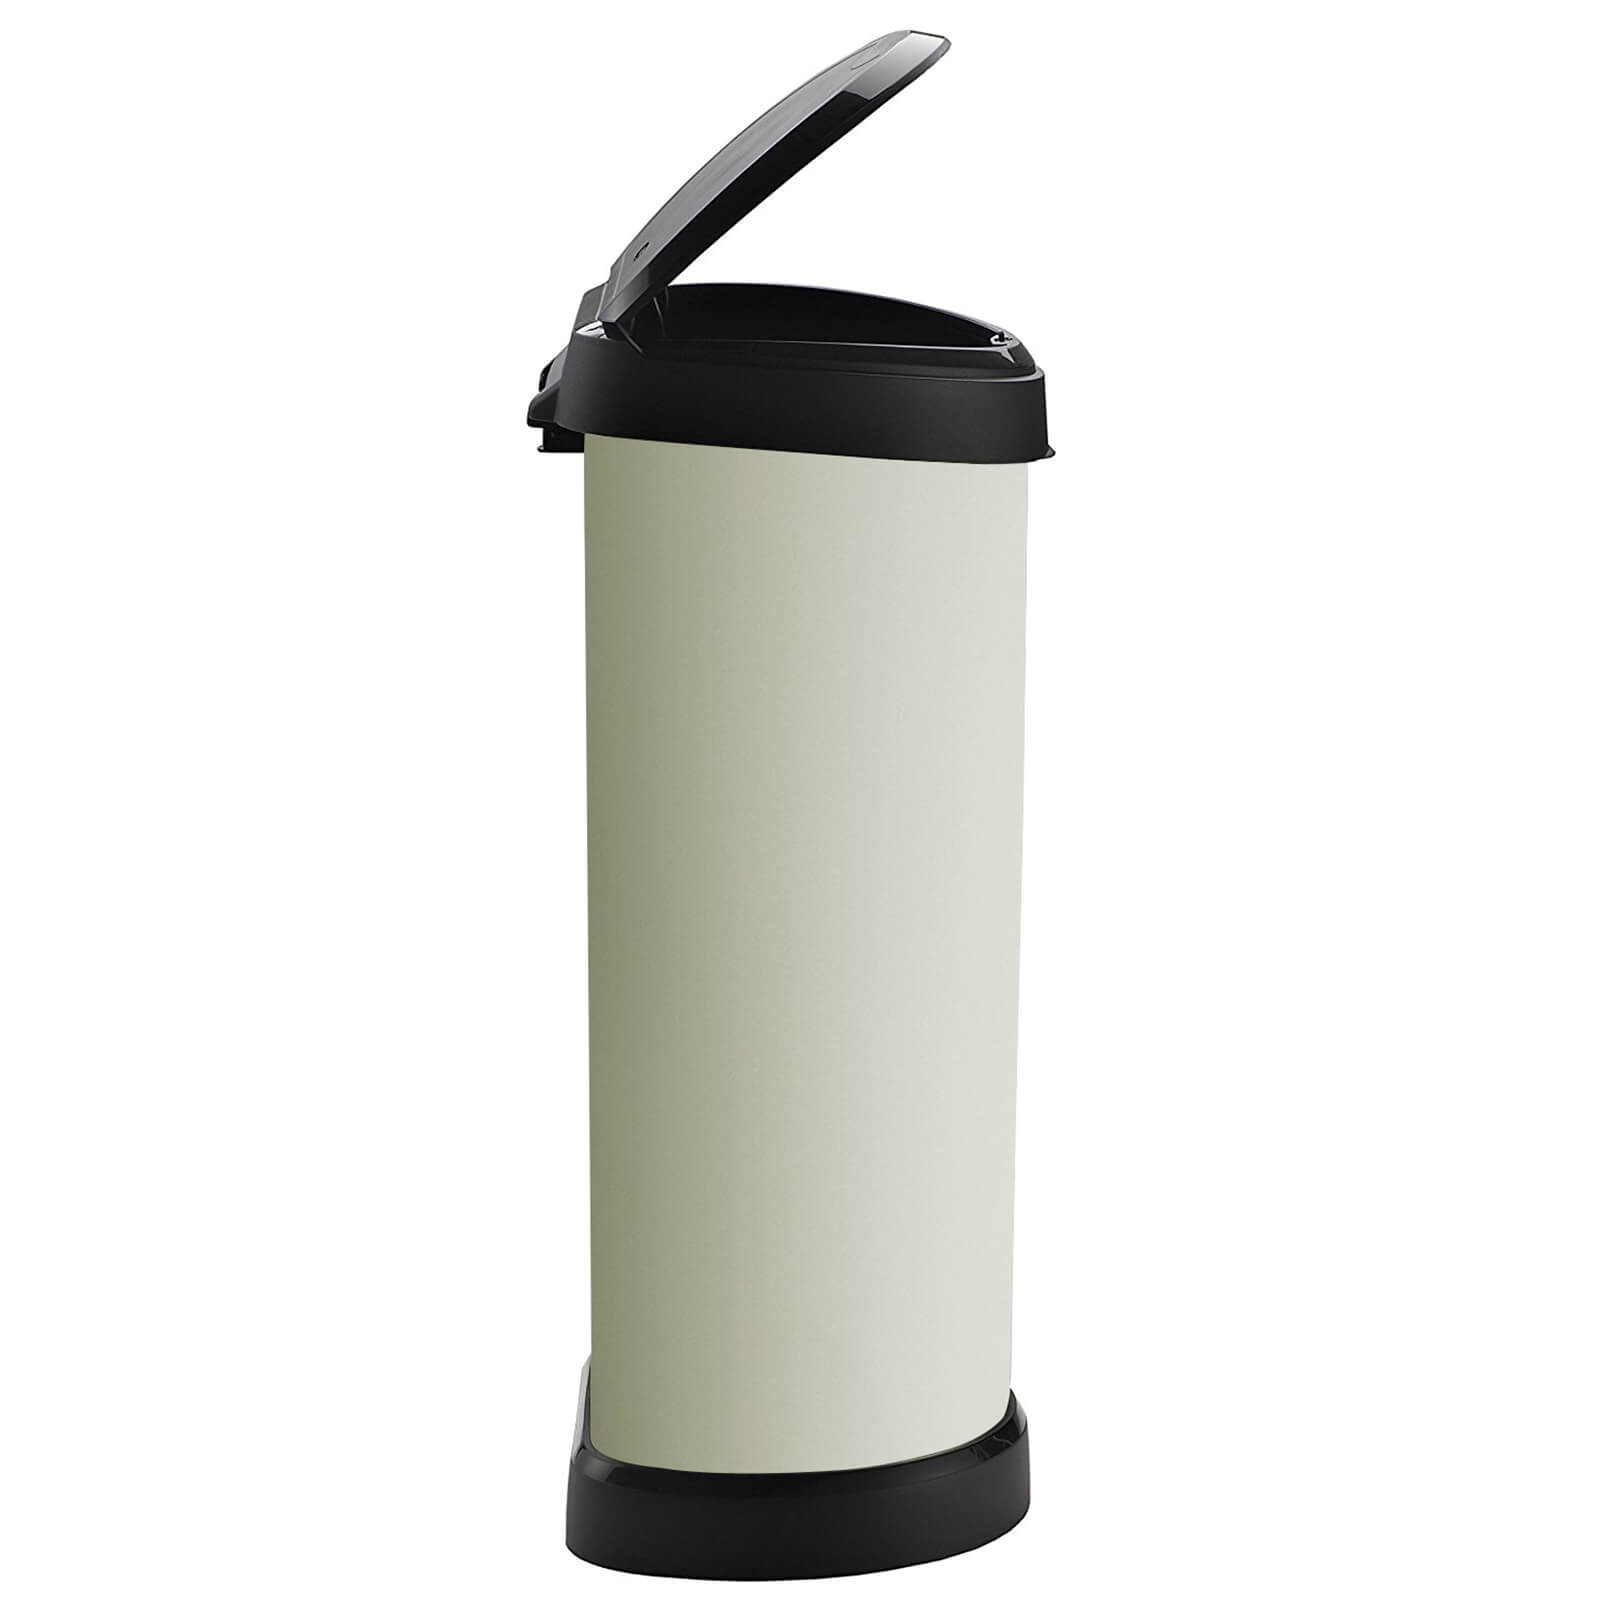 Curver 40L Metal Effect Plastic One Touch Deco Bin, Ivory